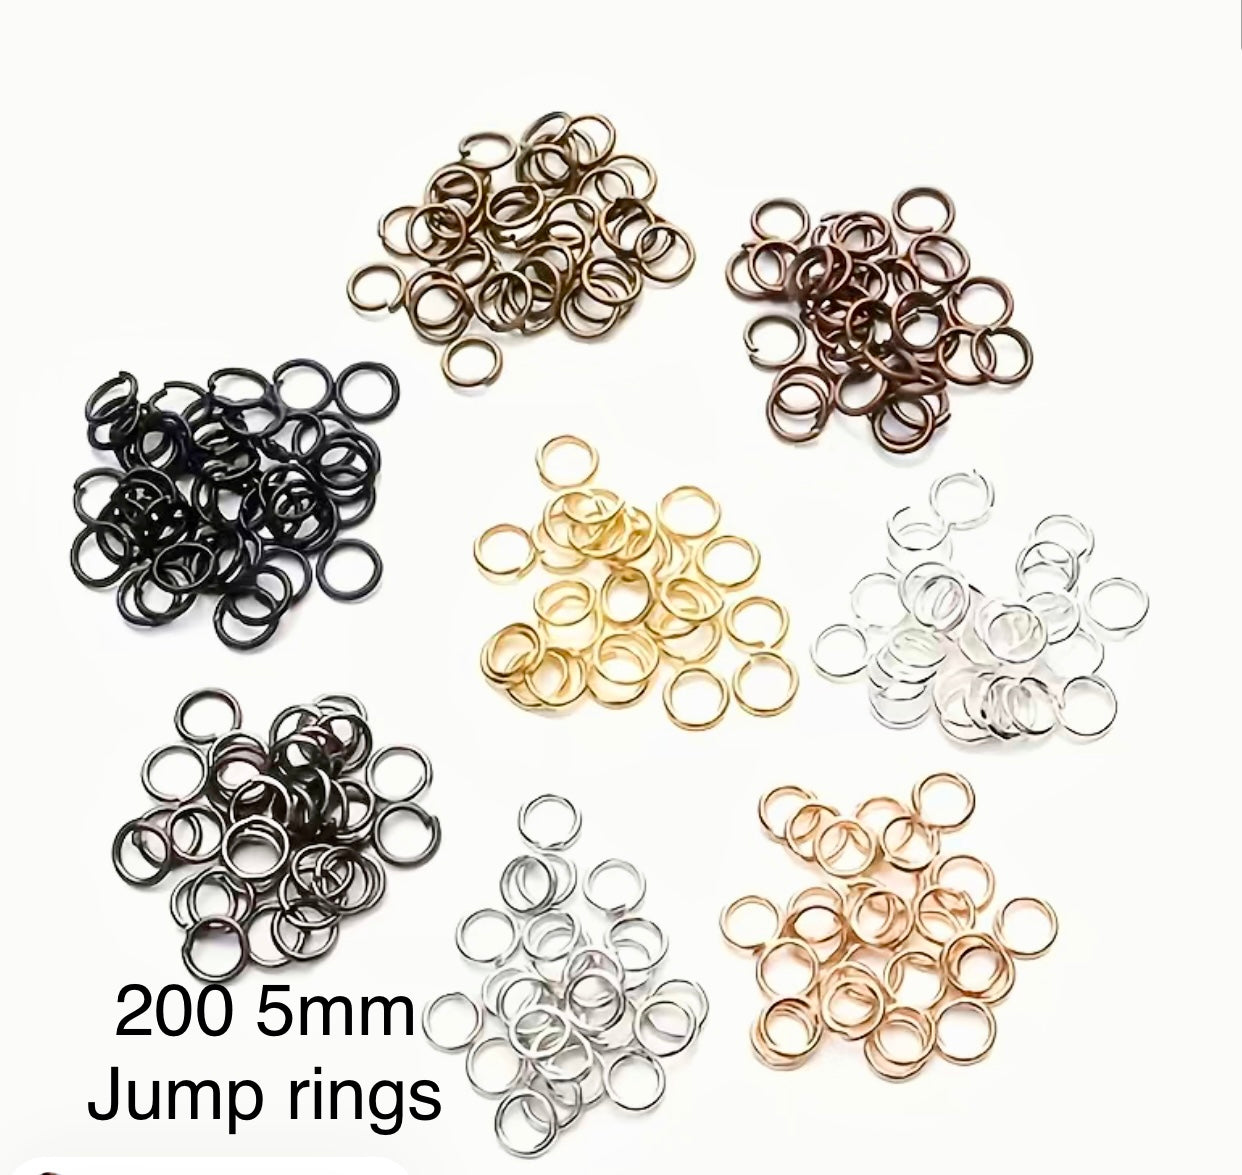 5mm Jump rings 200 pieces